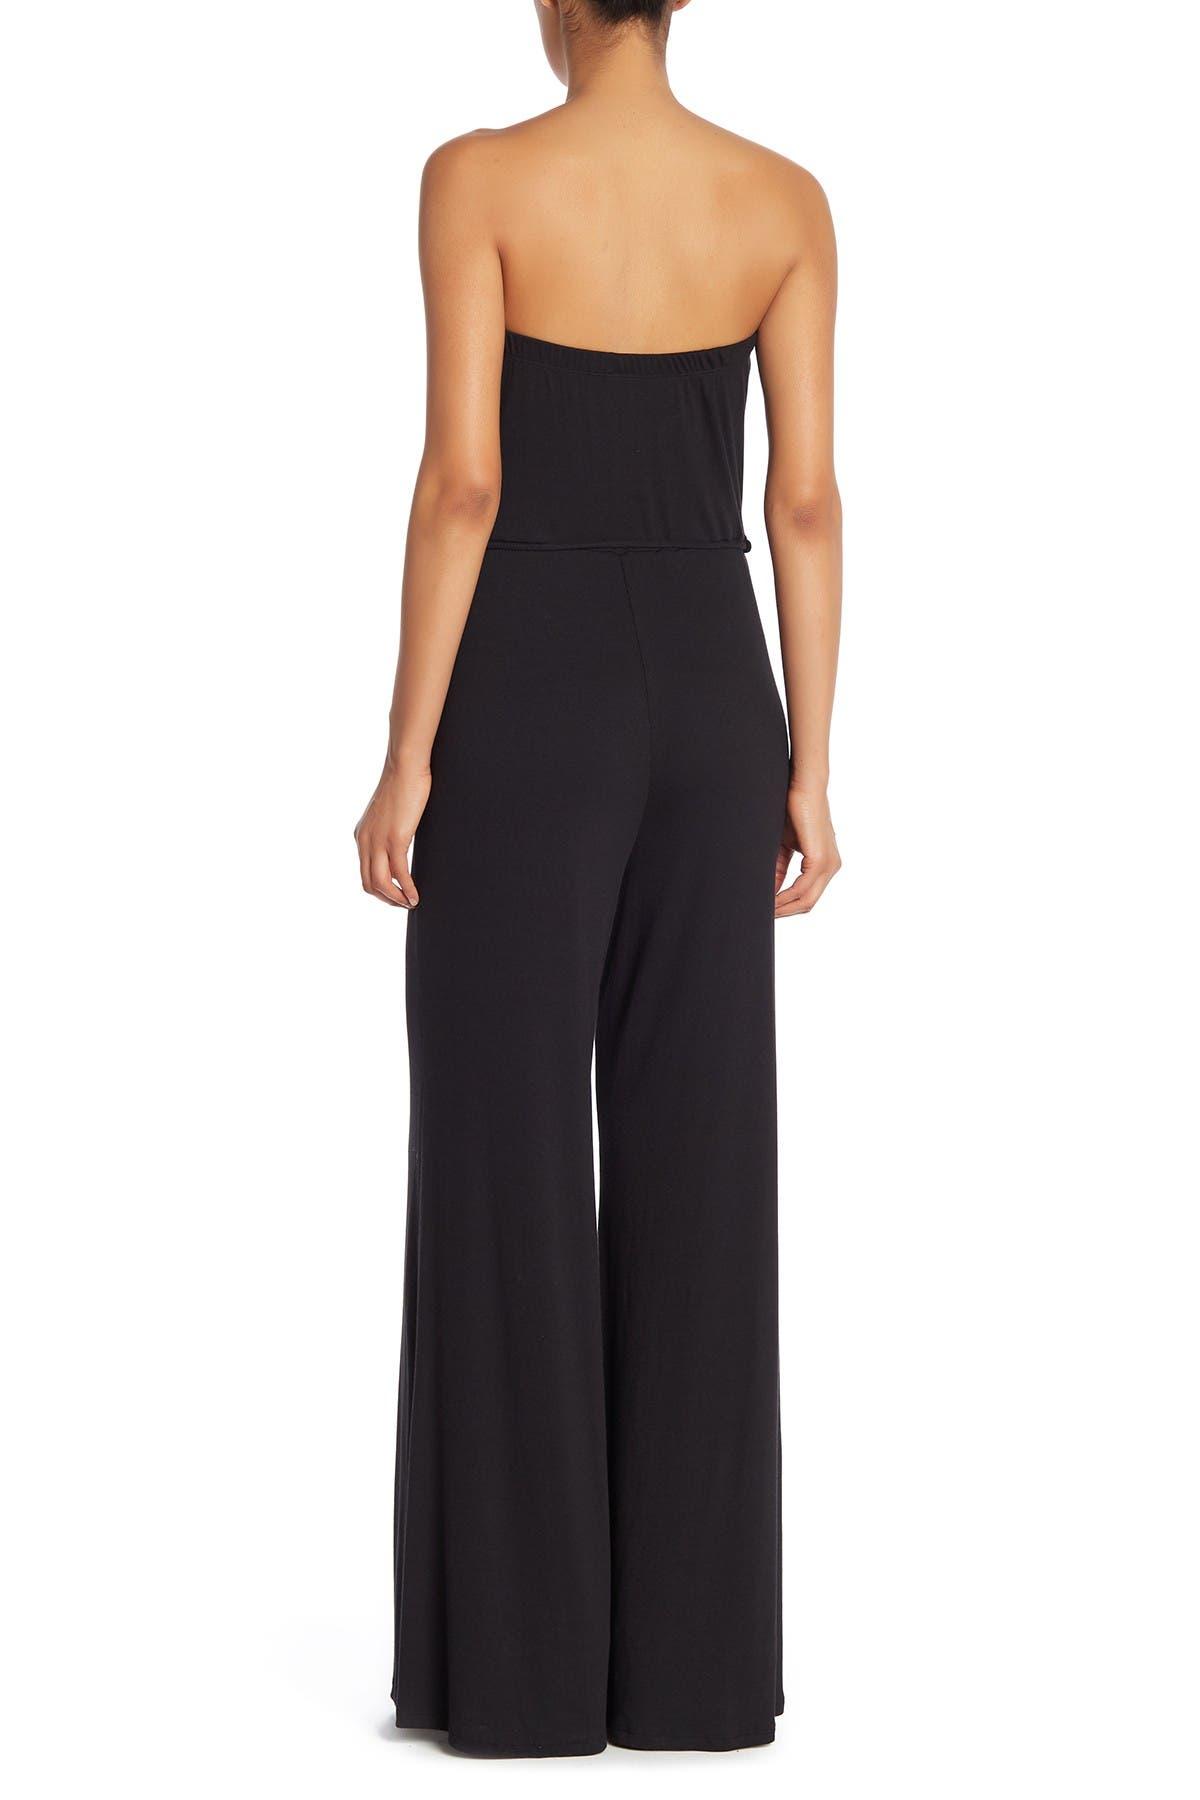 Go Couture Strapless Tube Jumpsuit In Black At Nordstrom Rack | Lyst